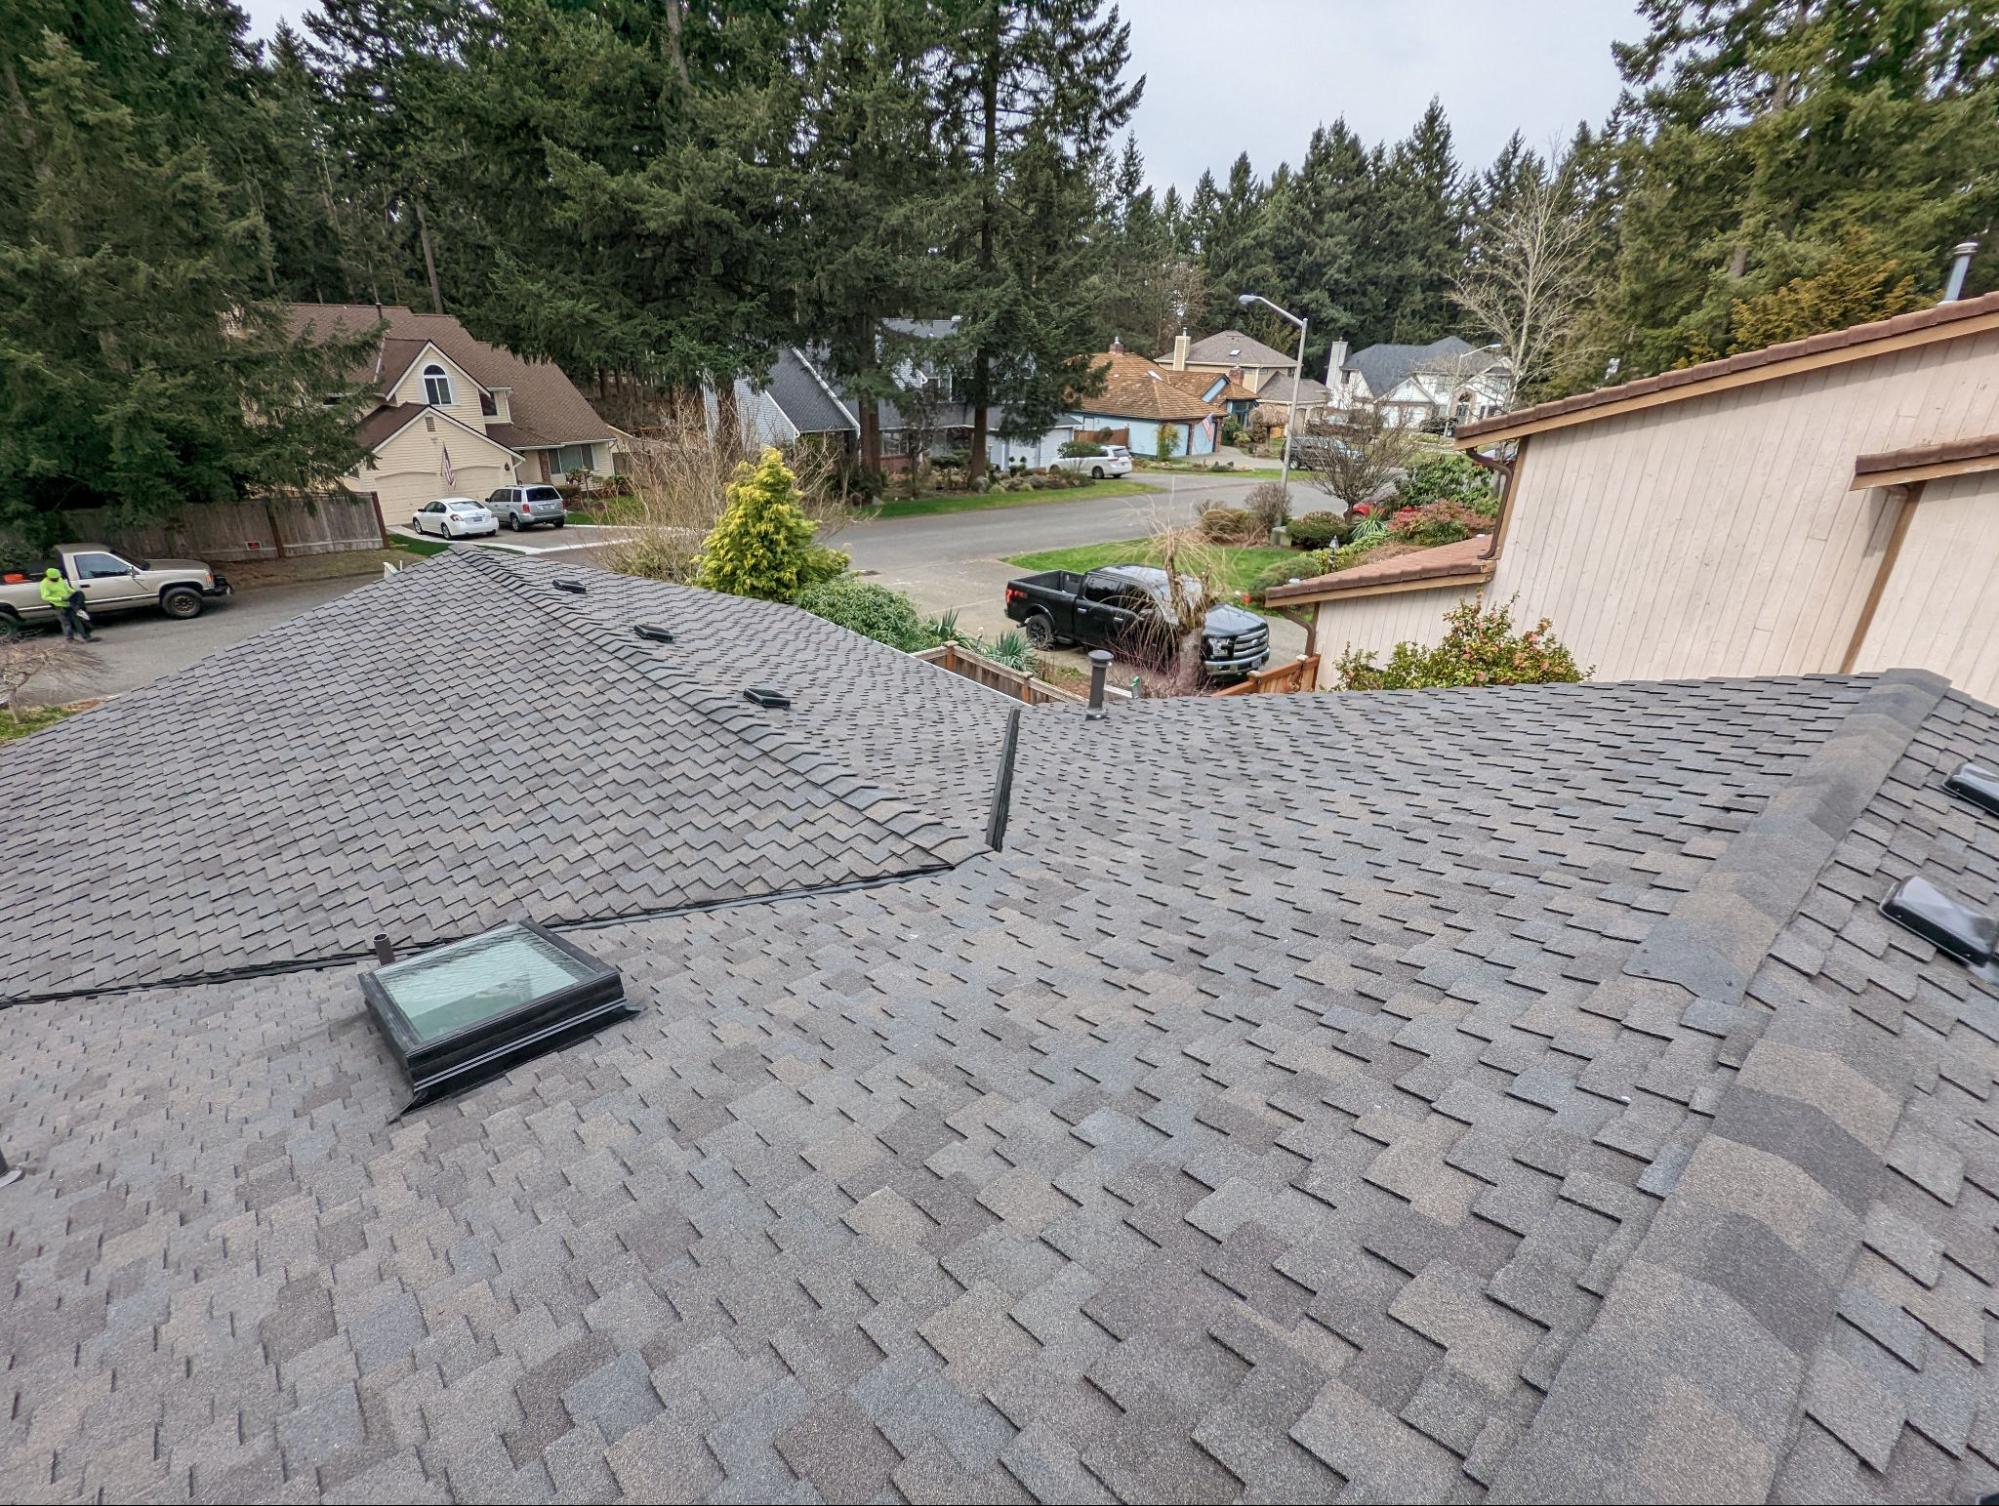 A brand new roof after re-roofing.